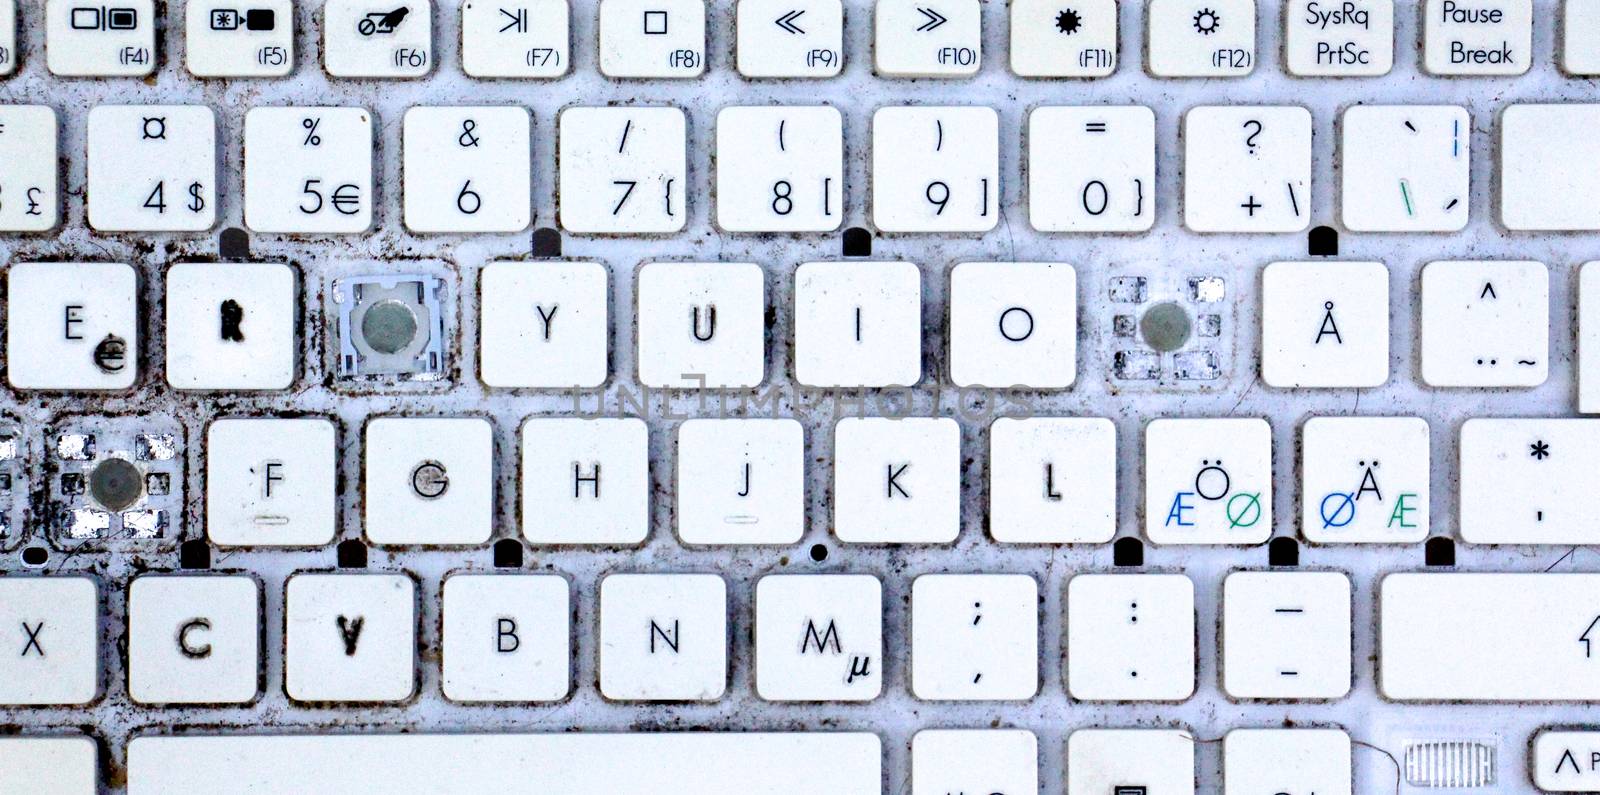 A close view of some keys on a dirty, yellowed keyboard. by nehru